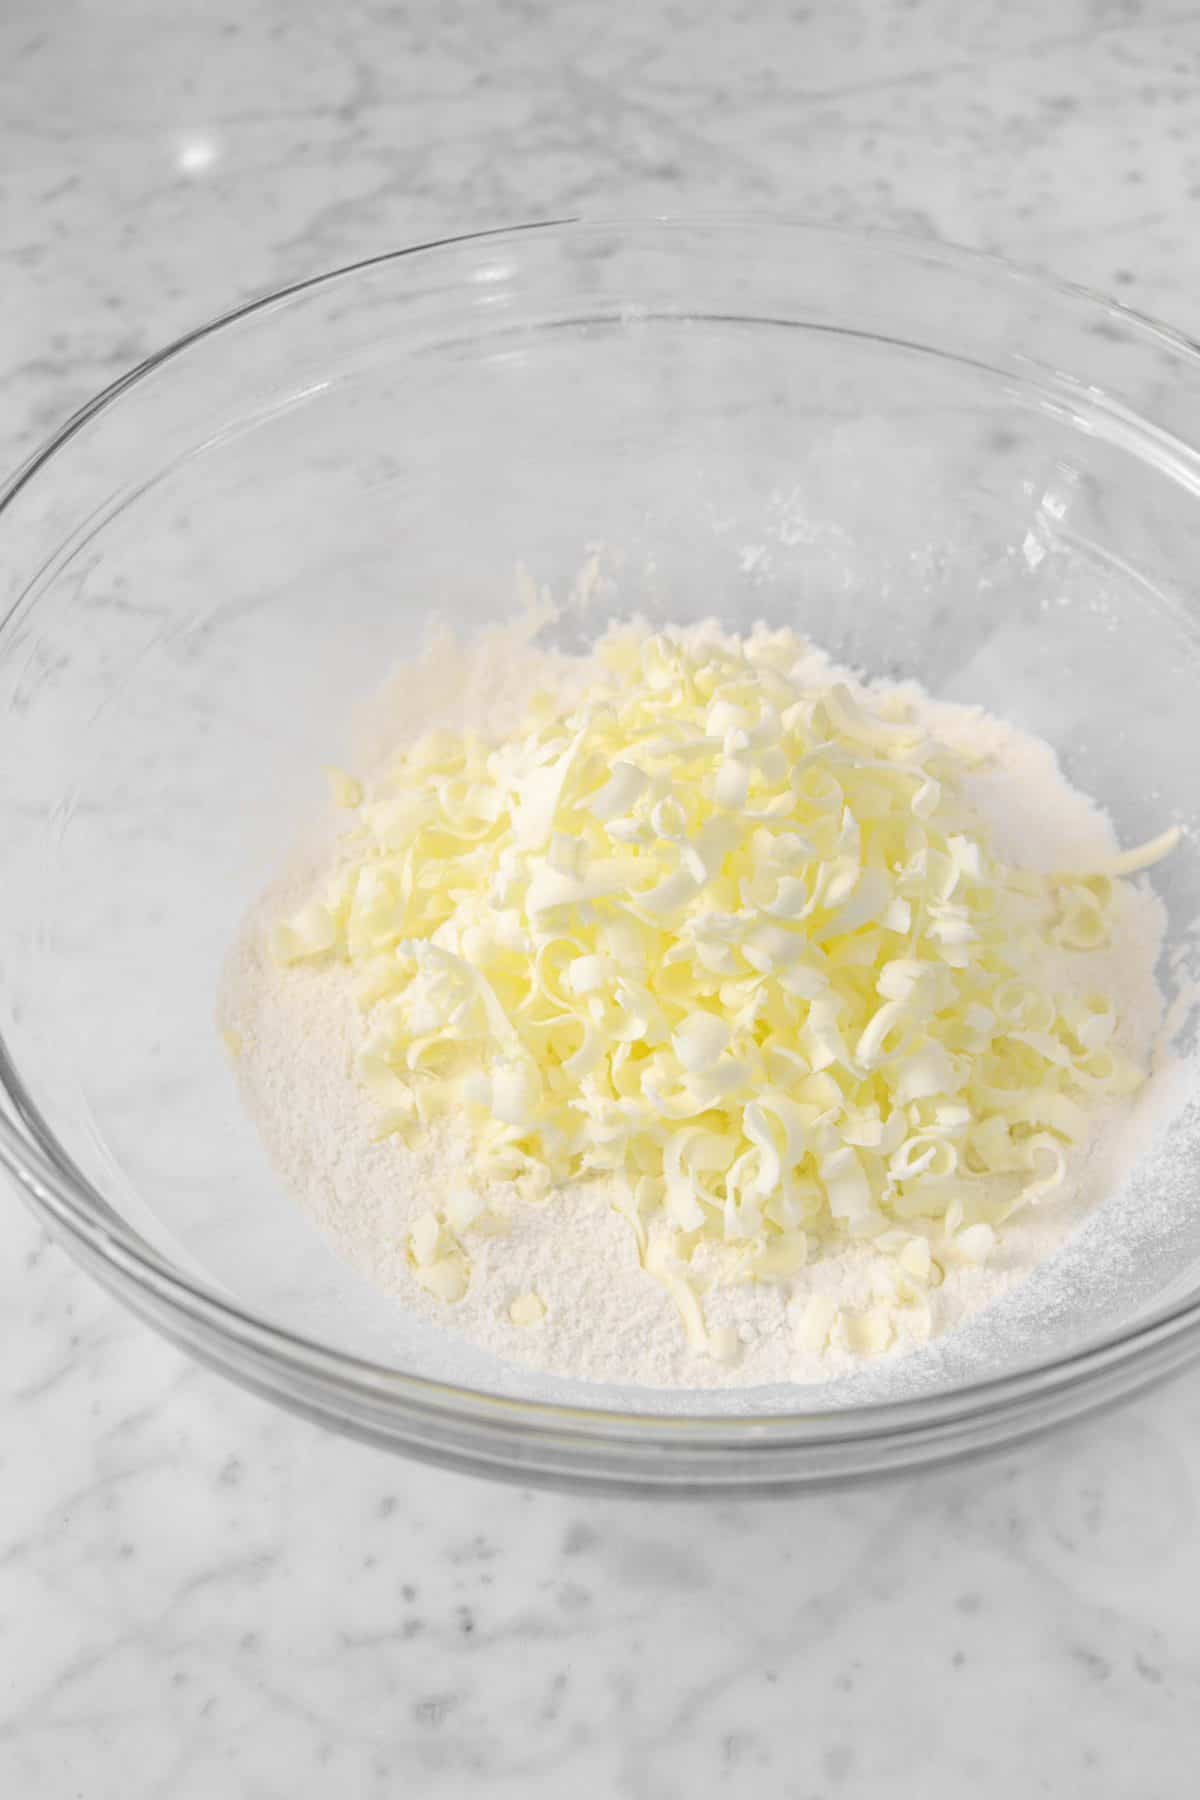 butter grated into a glass bowl